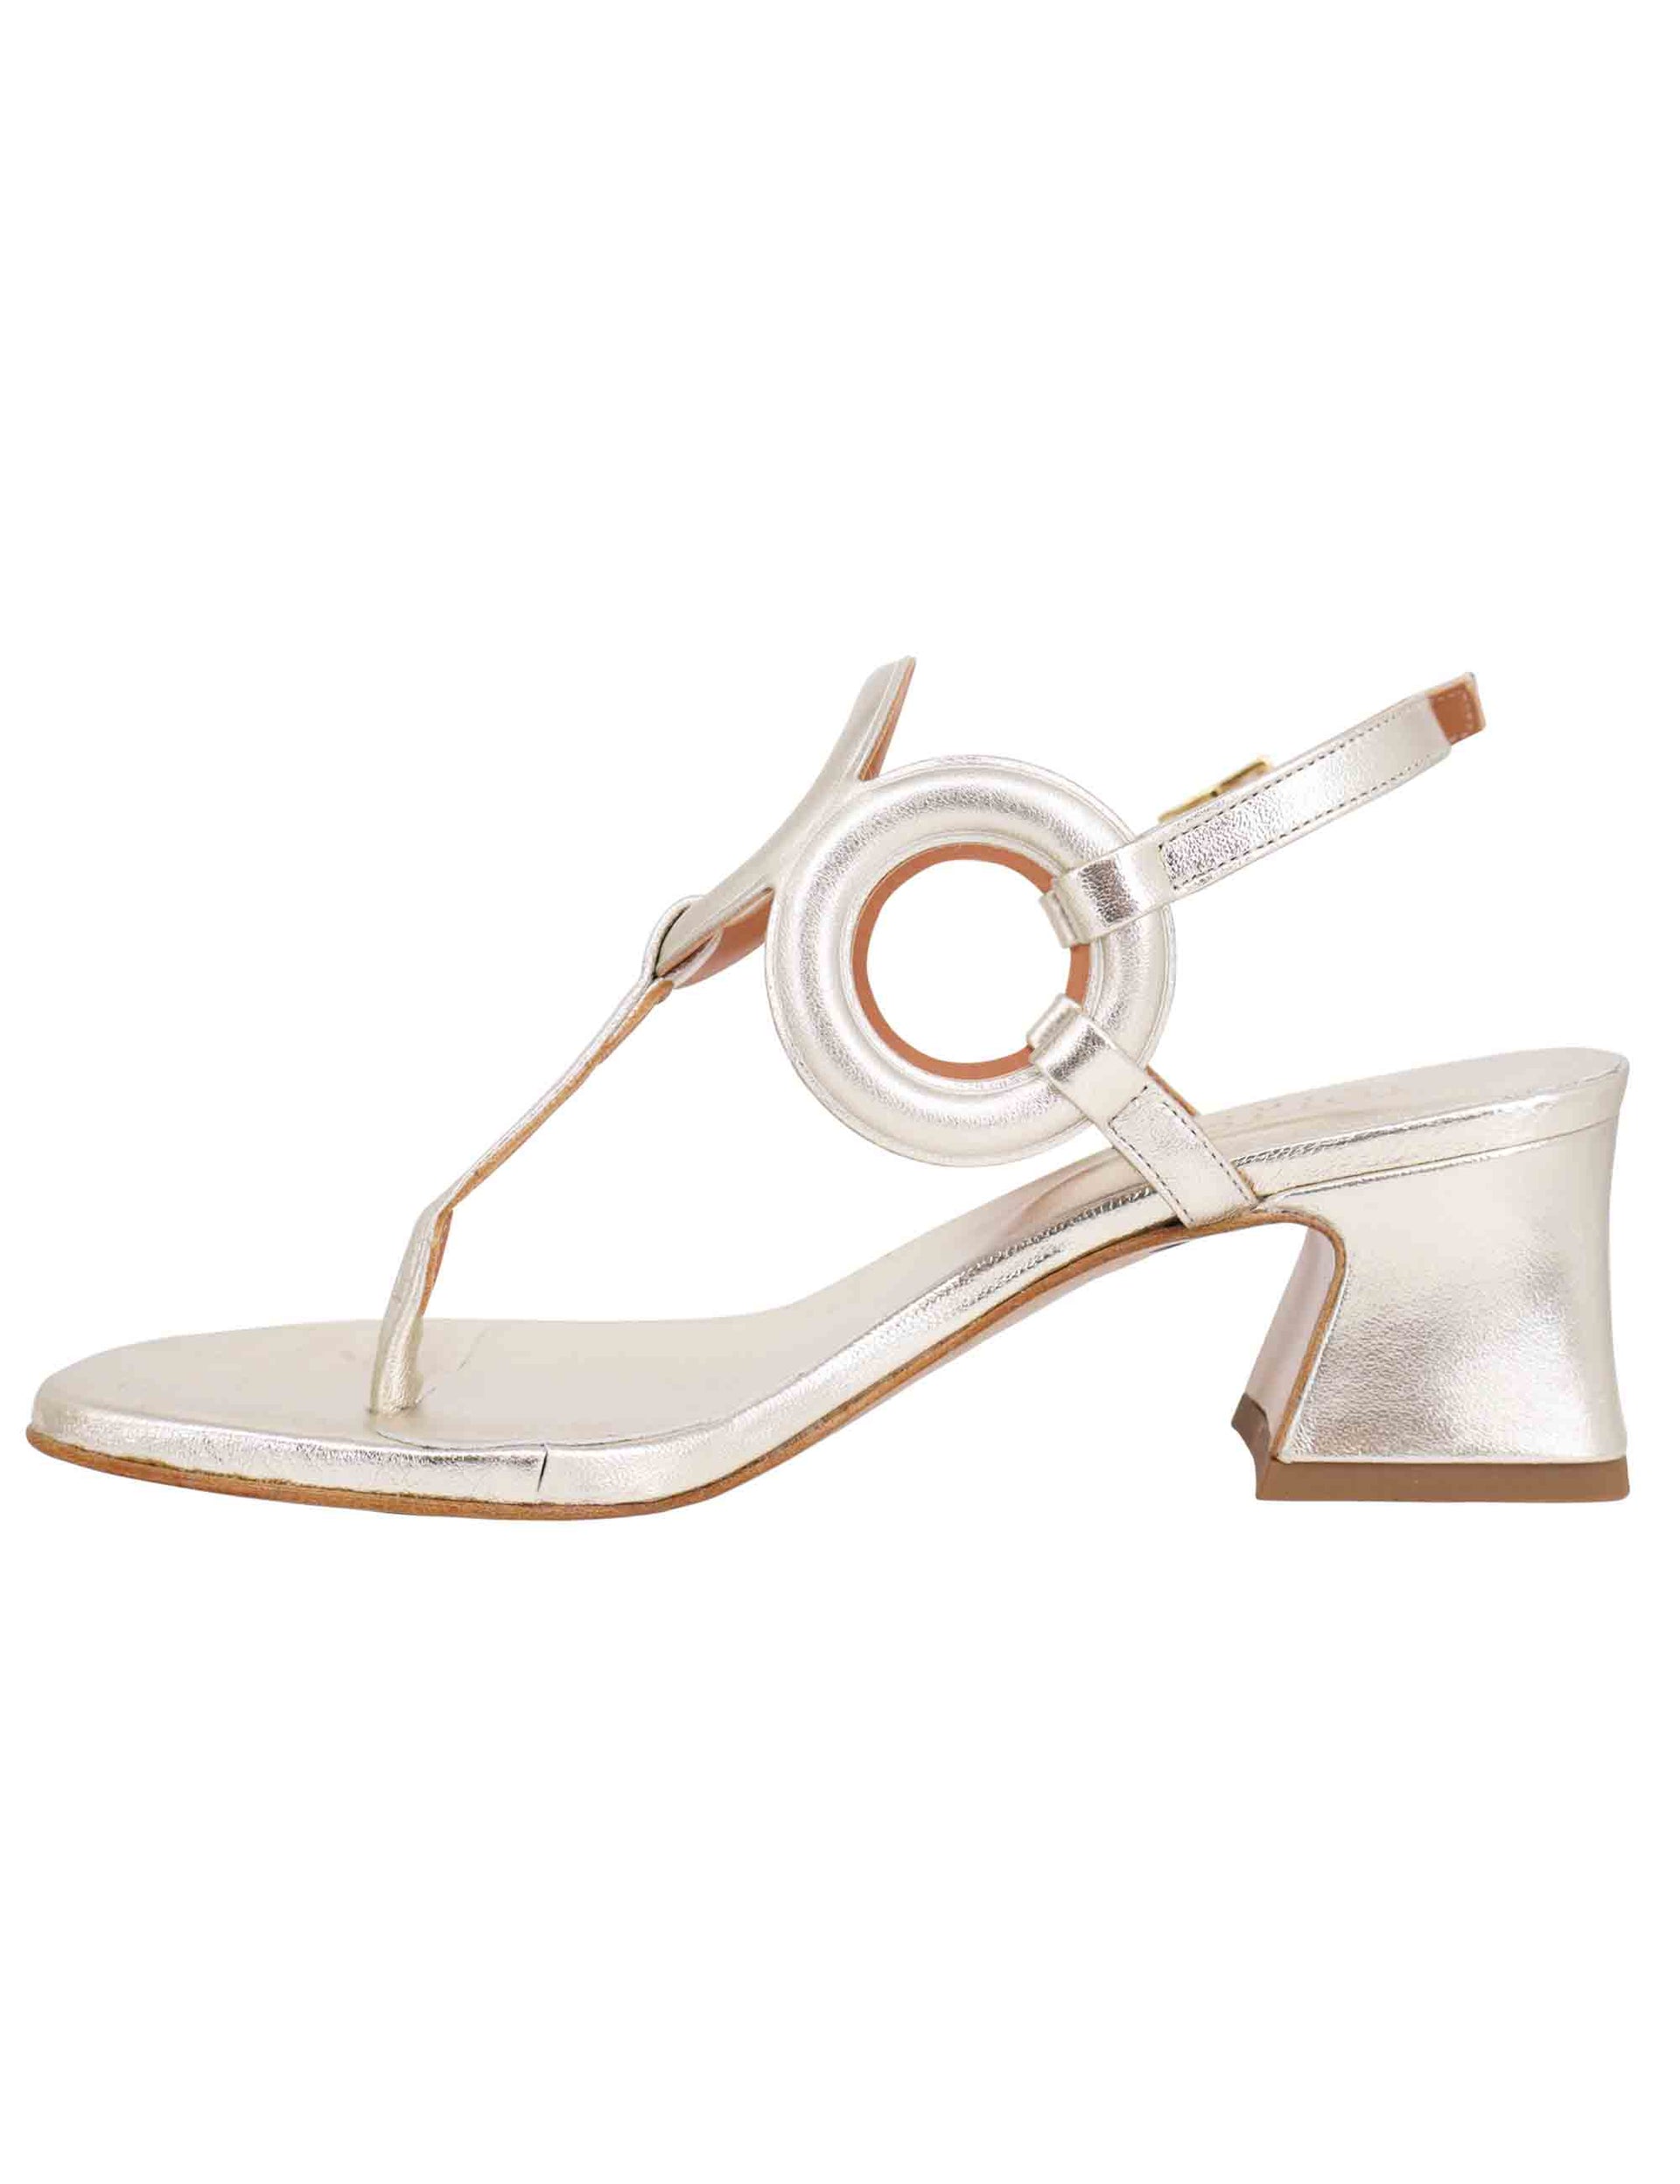 Women's slingback flip-flop sandals in platinum laminated leather with round toe